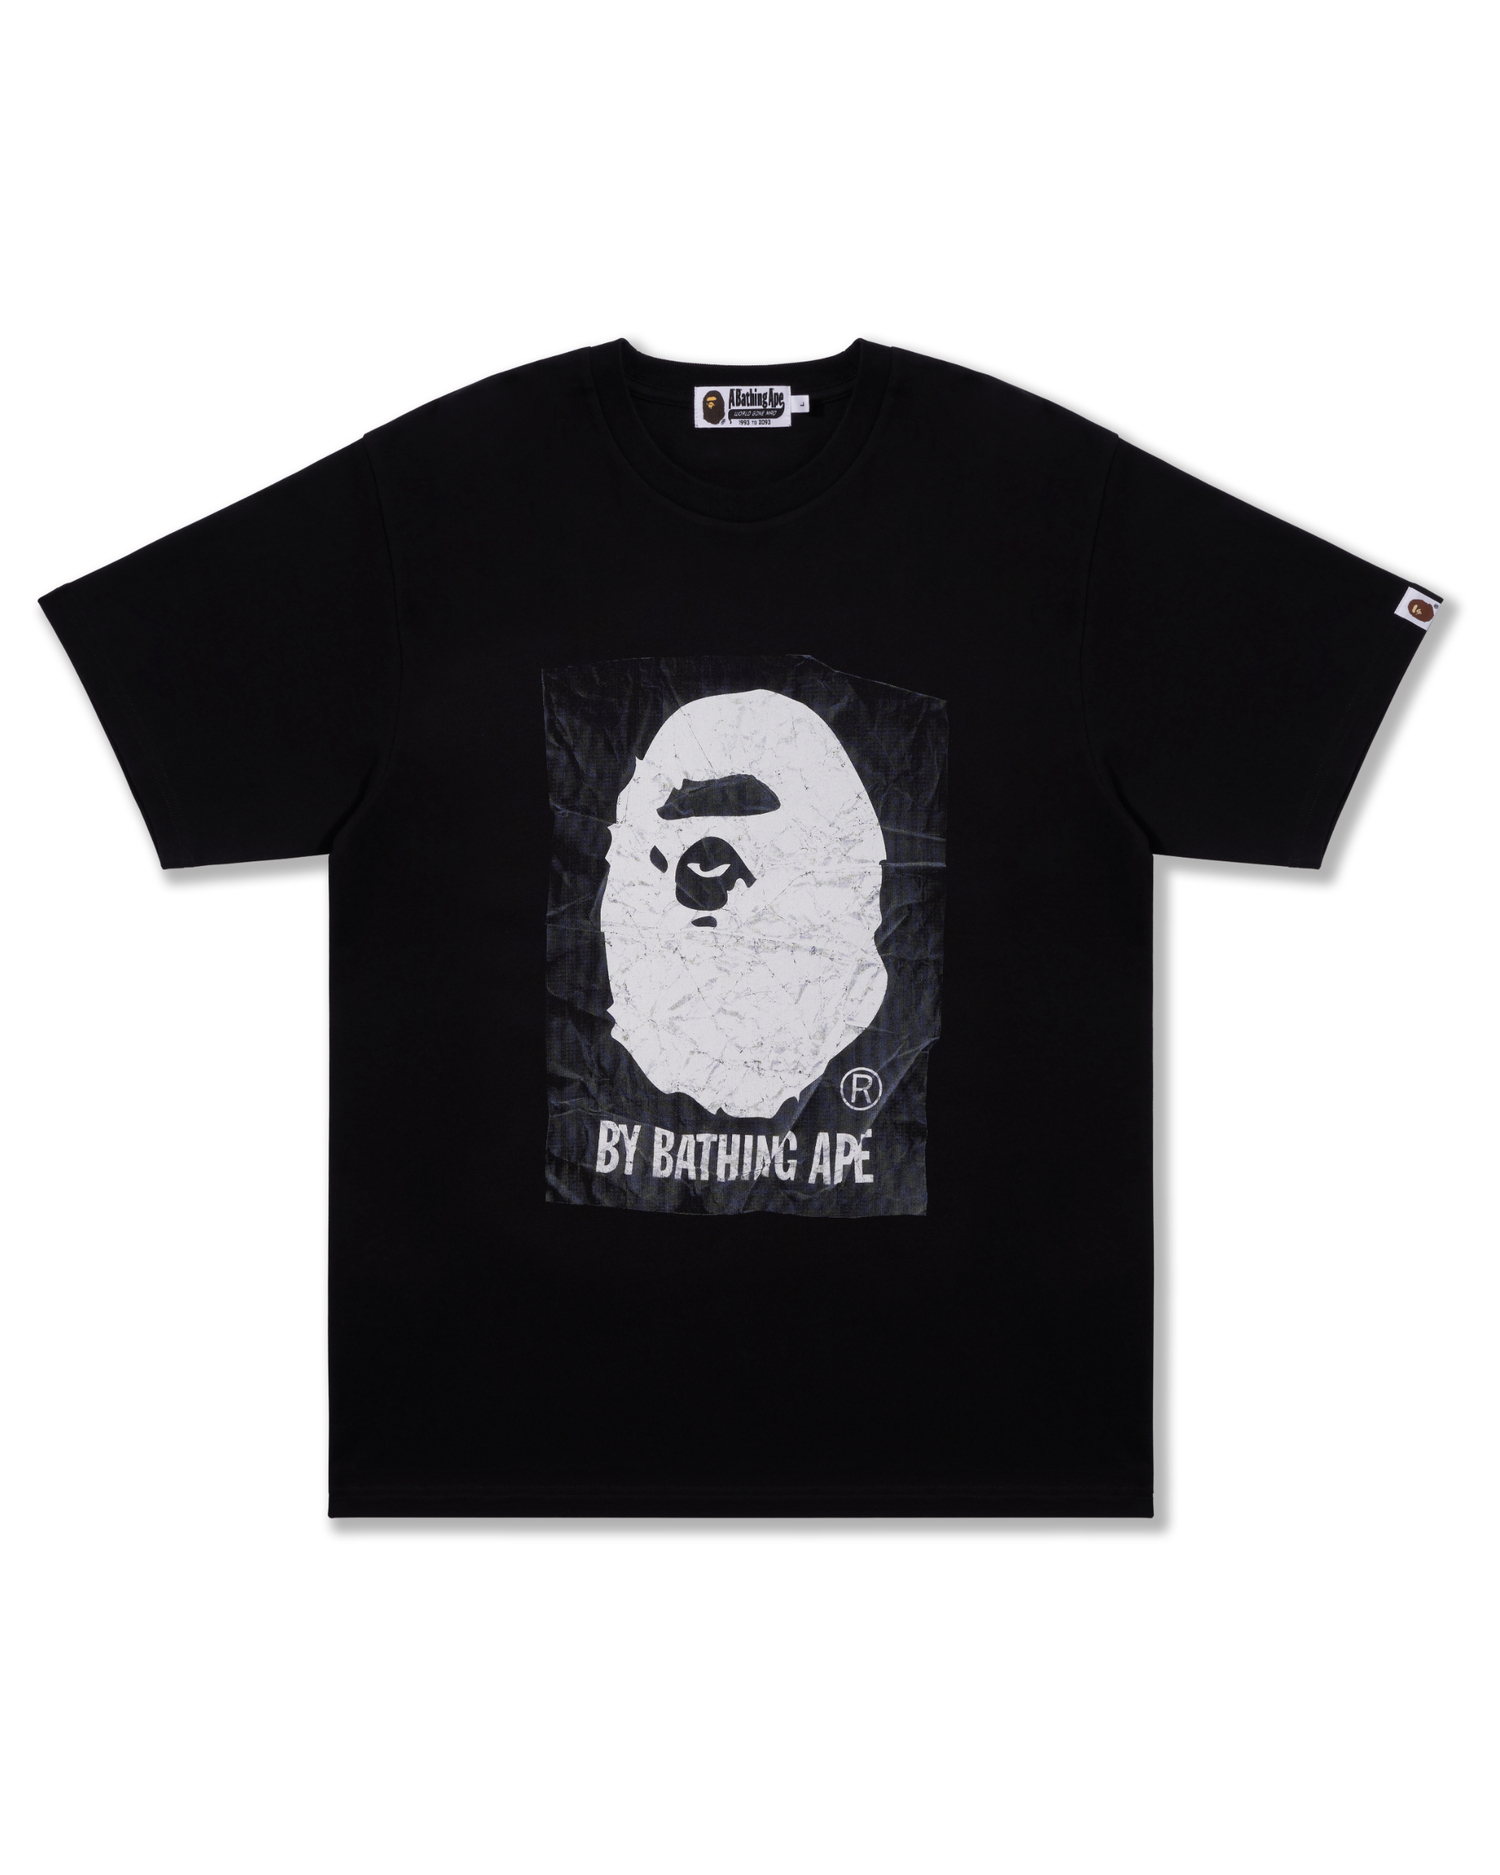 Shop By Bathing Ape Relaxed Fit Tee Online | BAPE